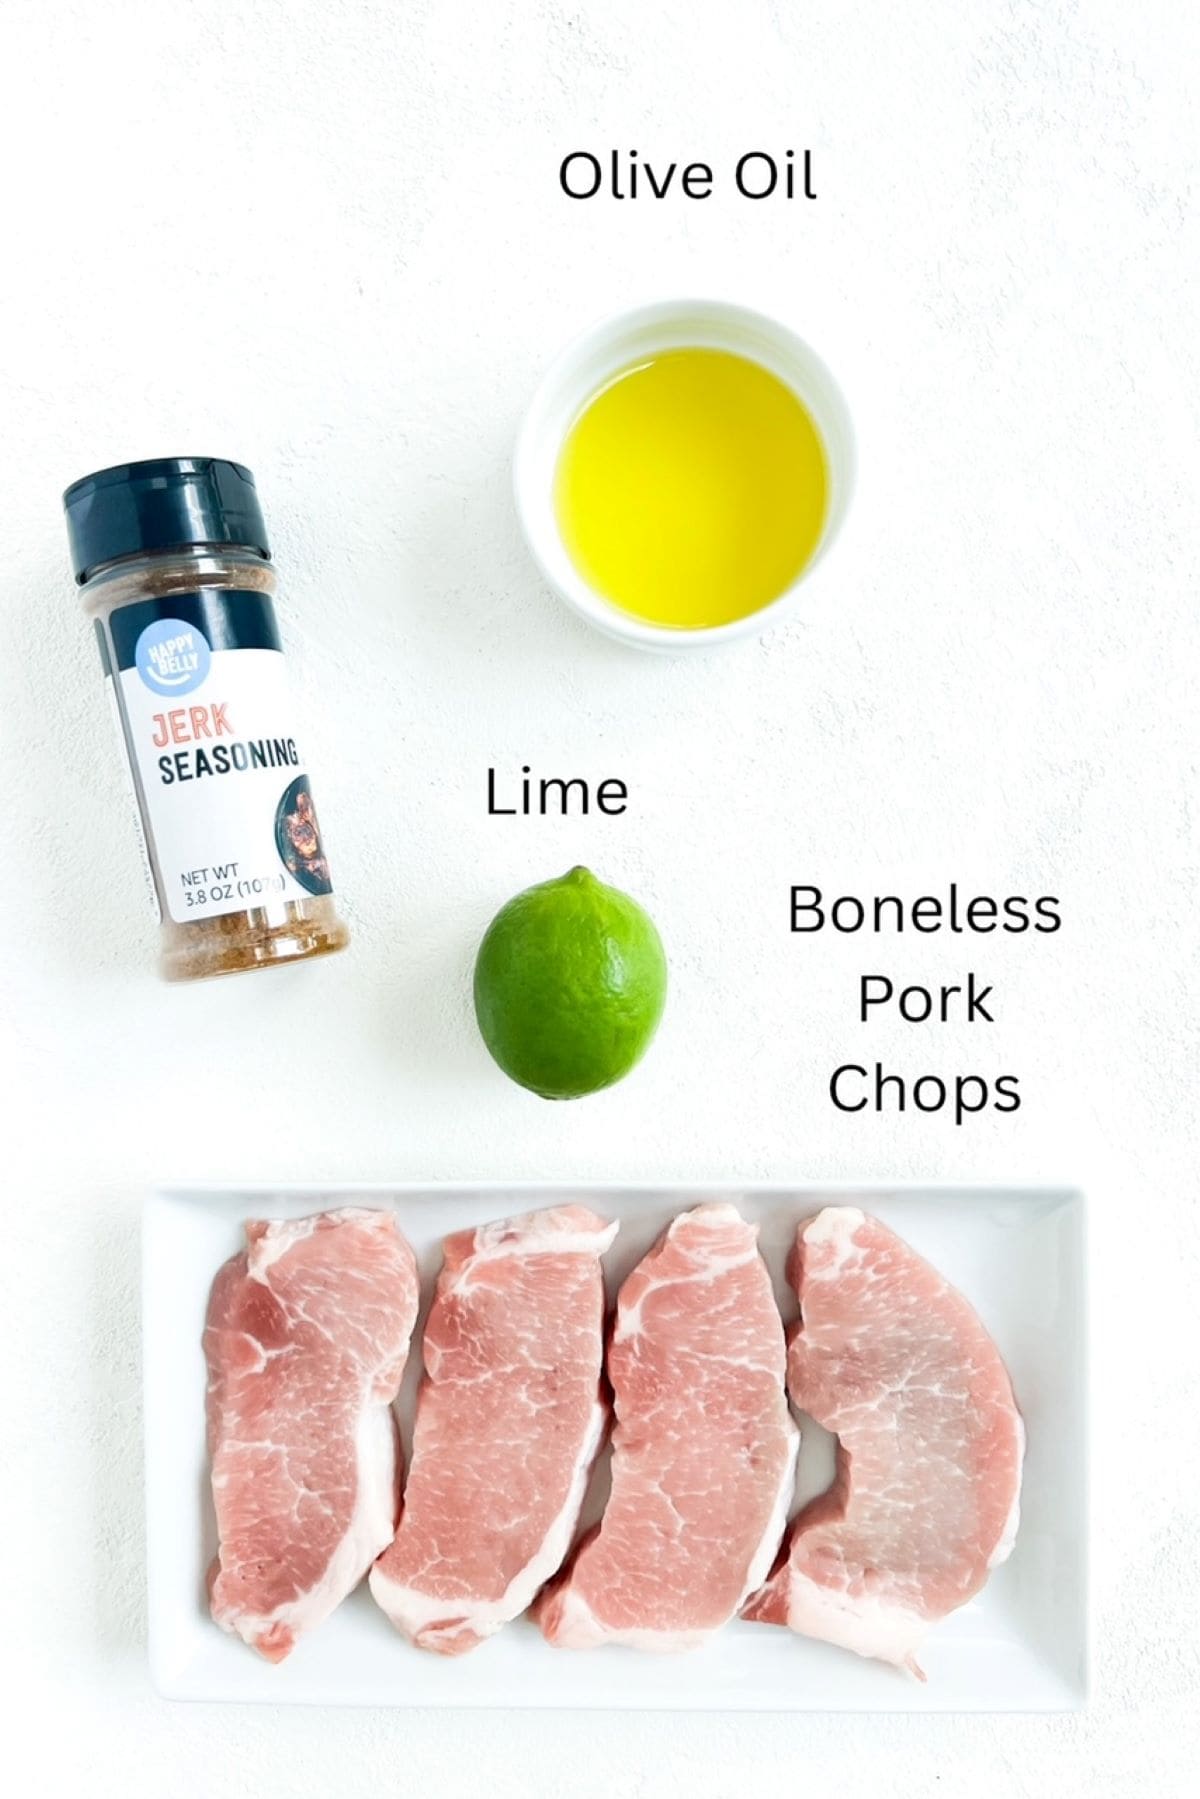 Four boneless pork chops, olive oil, one lime, labeled and a container of jerk seasoning on a white background.